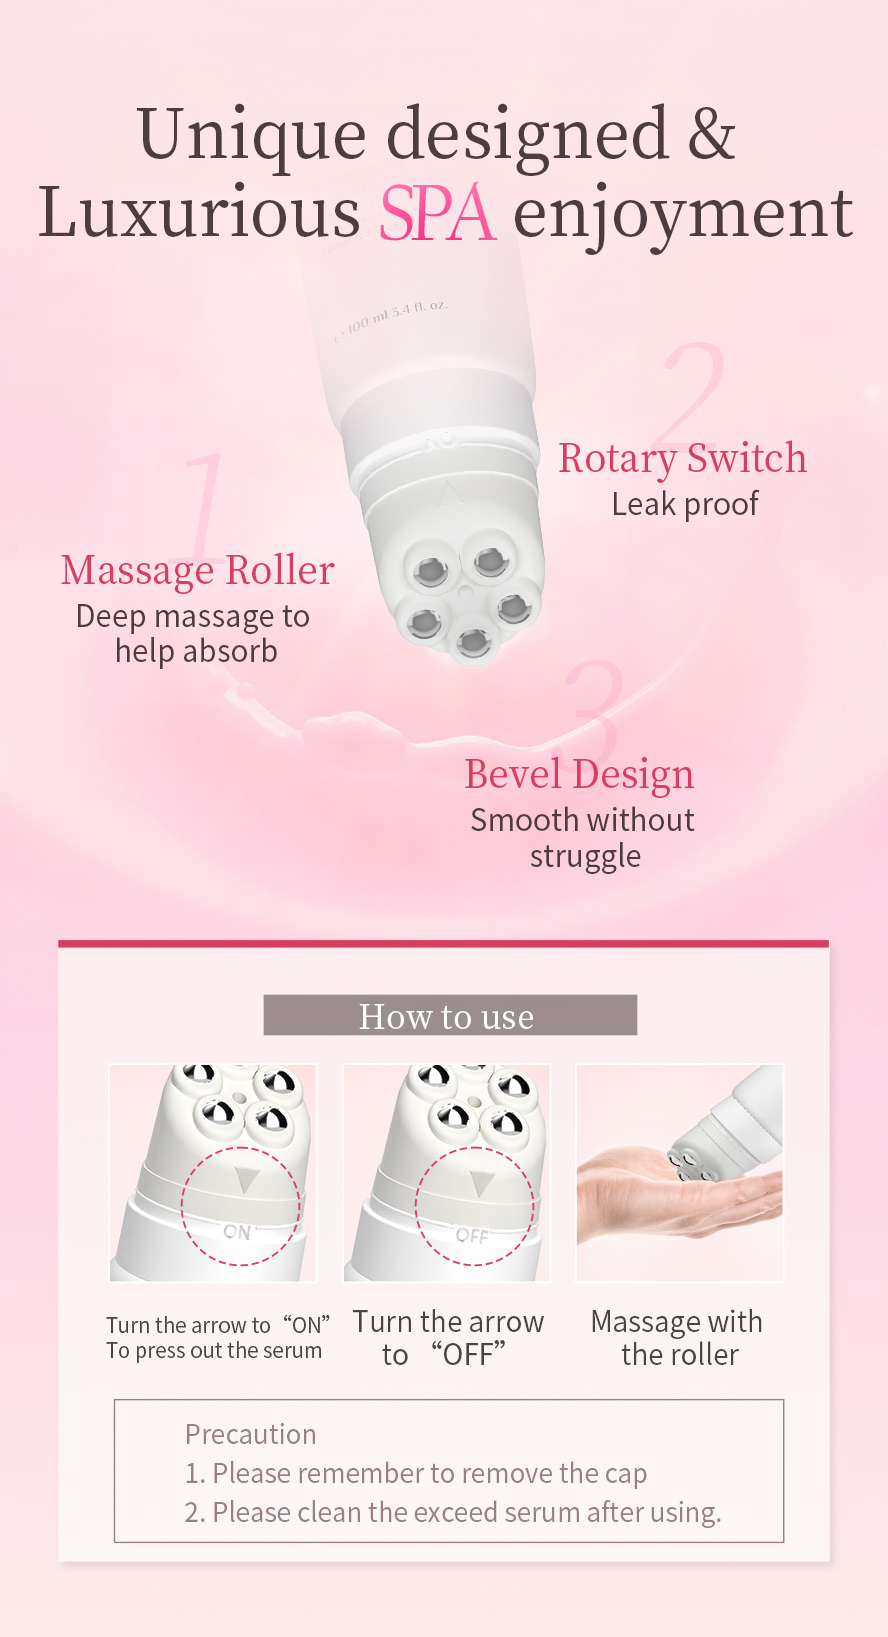 Bevel designed massage roller to promote great absoprtion, stimulate the growth of breast by massaging the acupoint.